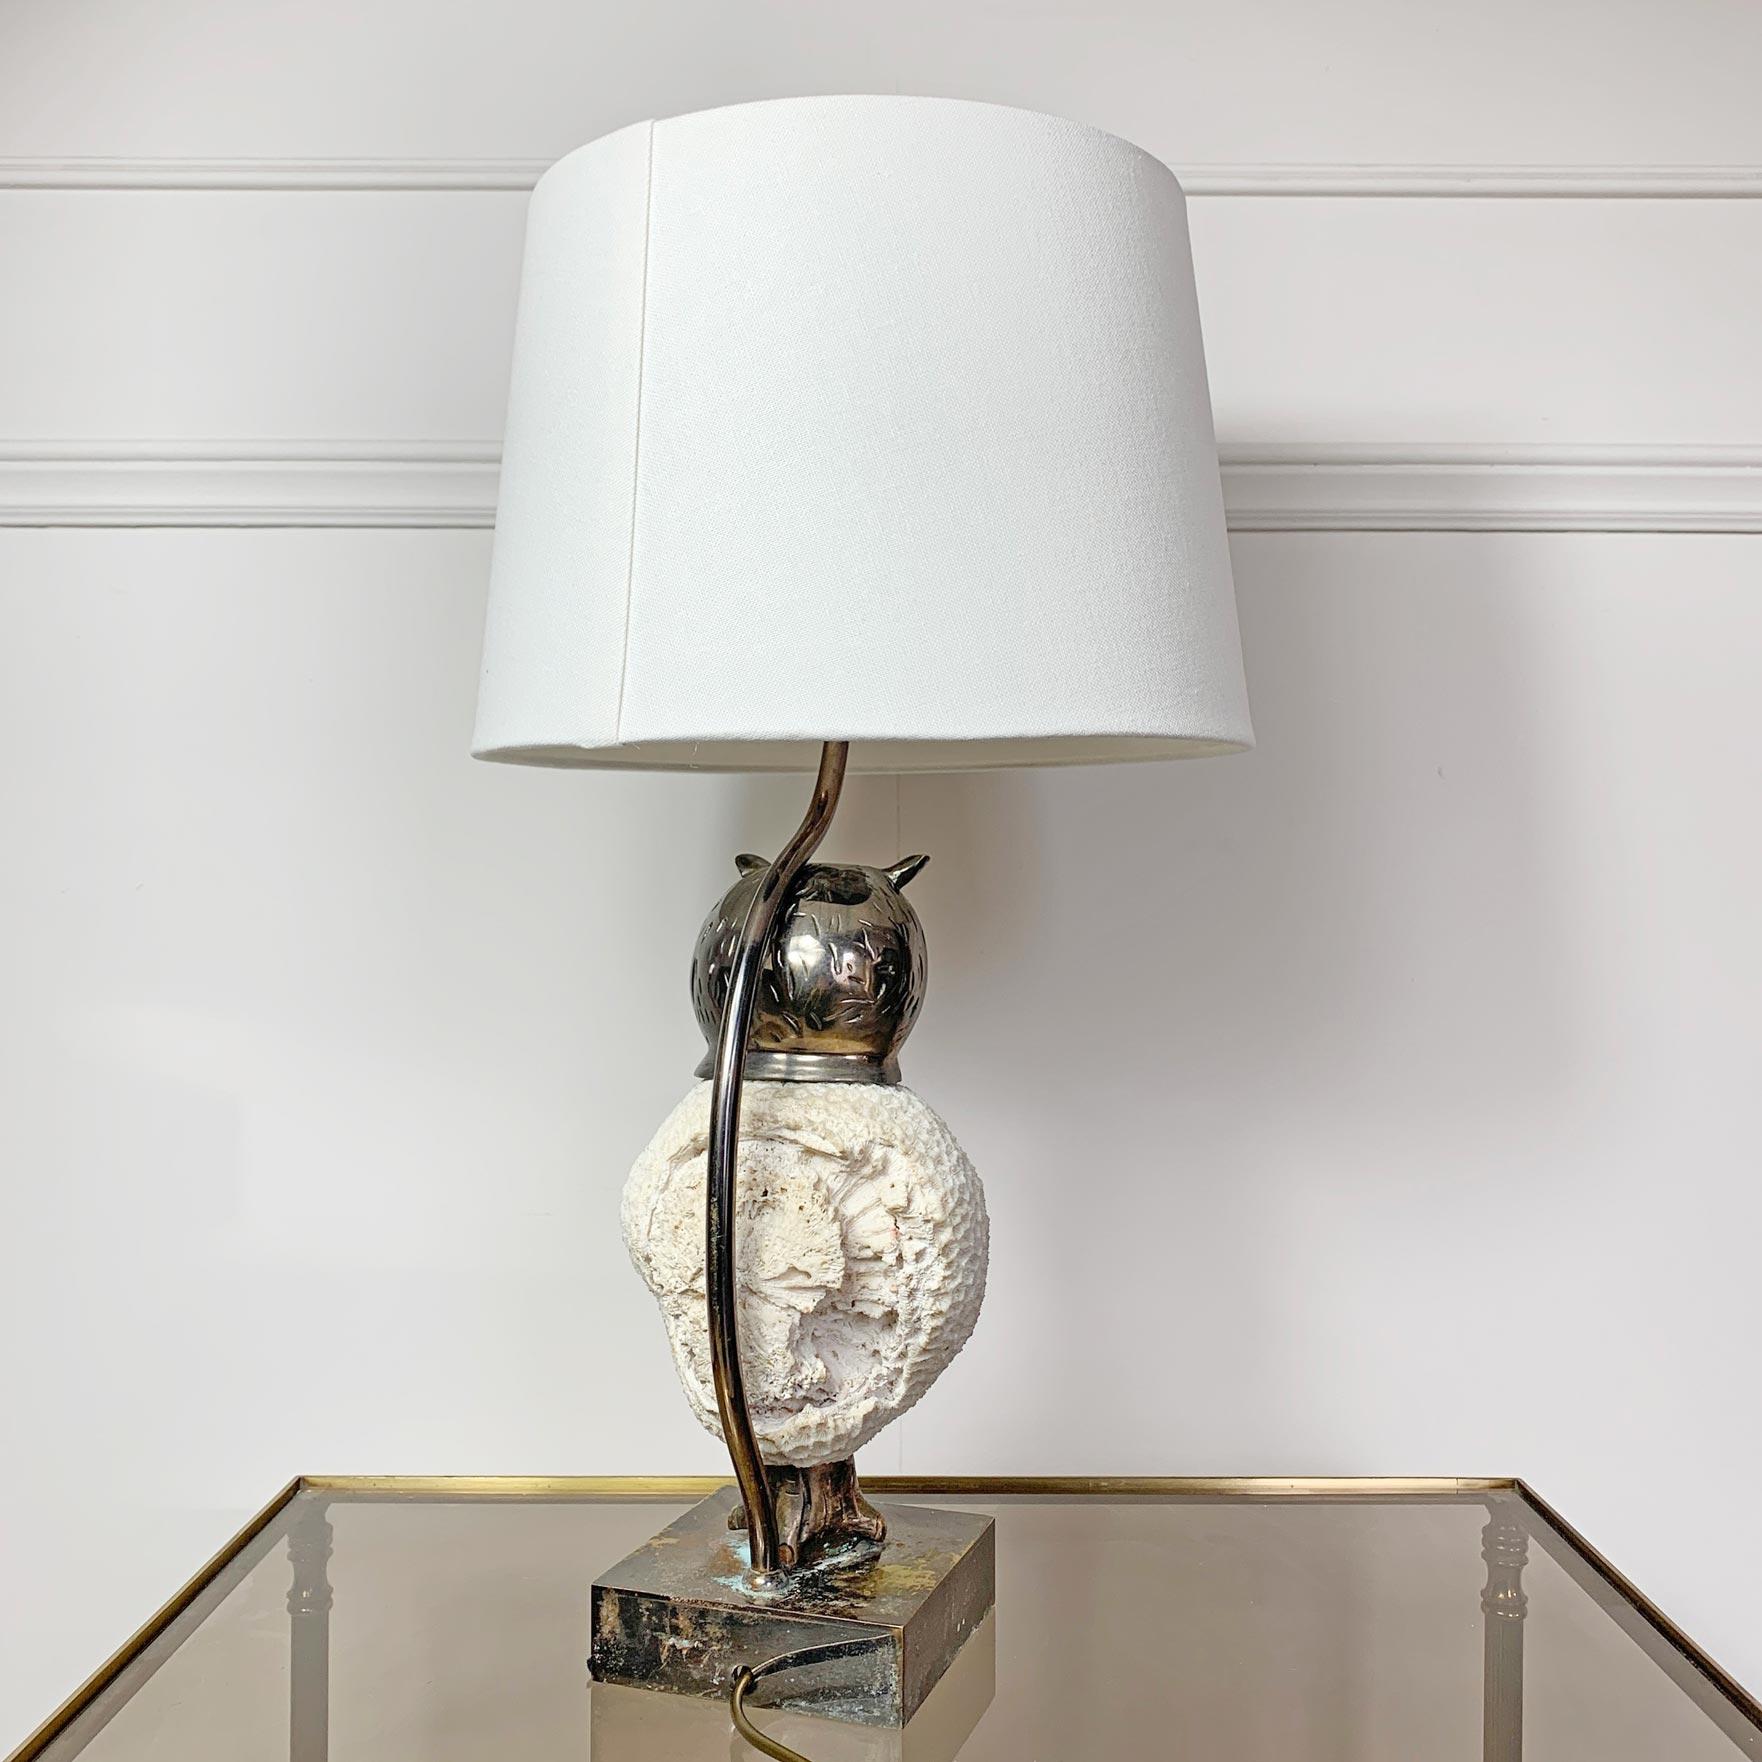 Willy Daro White Owl Table Lamp, 1970s For Sale 1